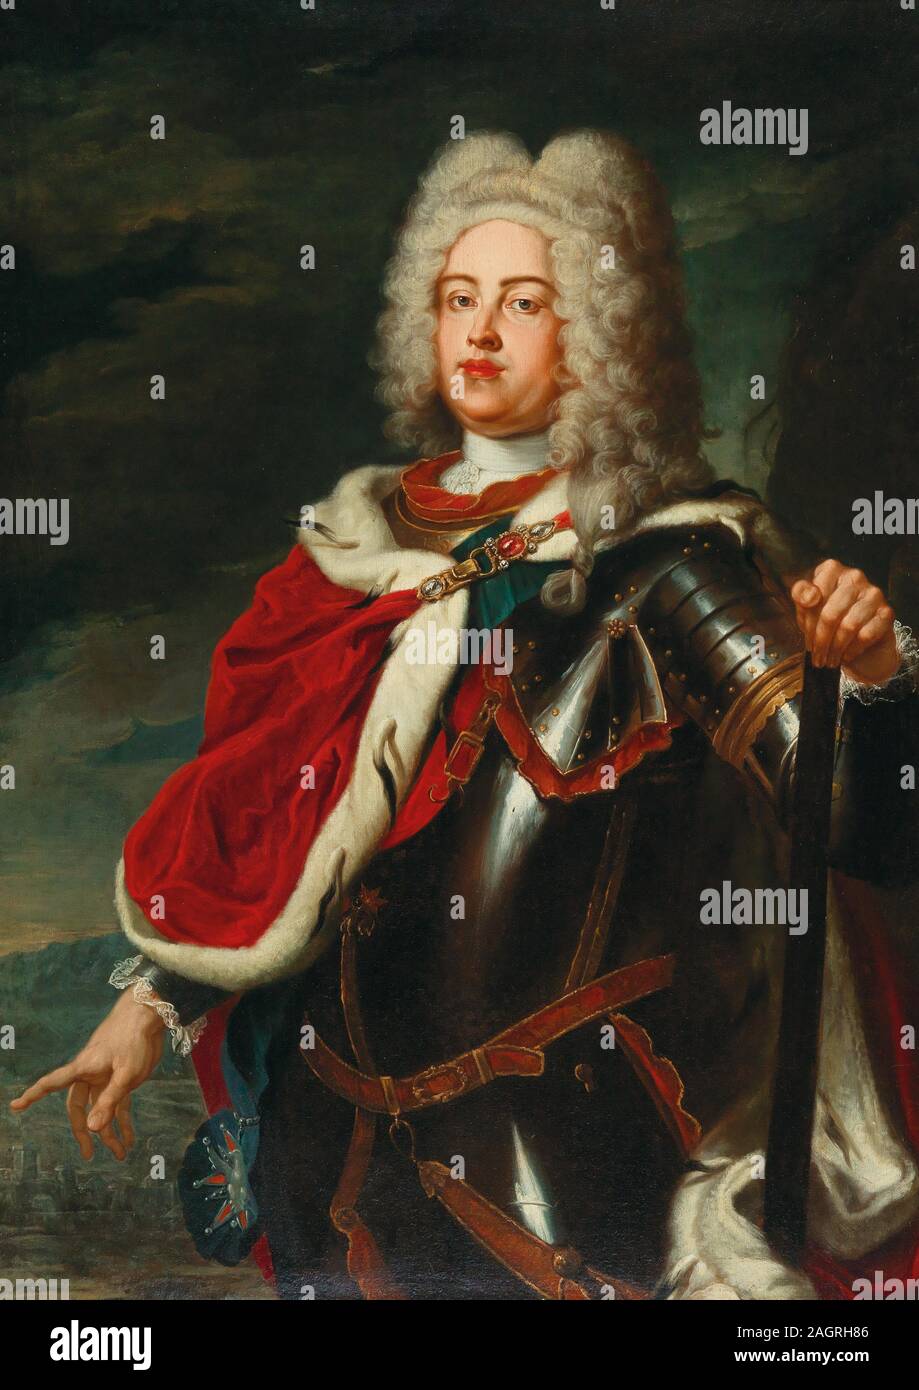 Portrait of Frederick Augustus II, Elector of Saxony and future King Augustus III of Poland (1696-1763), as Crown Prince. Museum: PRIVATE COLLECTION. Author: ADAM MANYOKI. Stock Photo